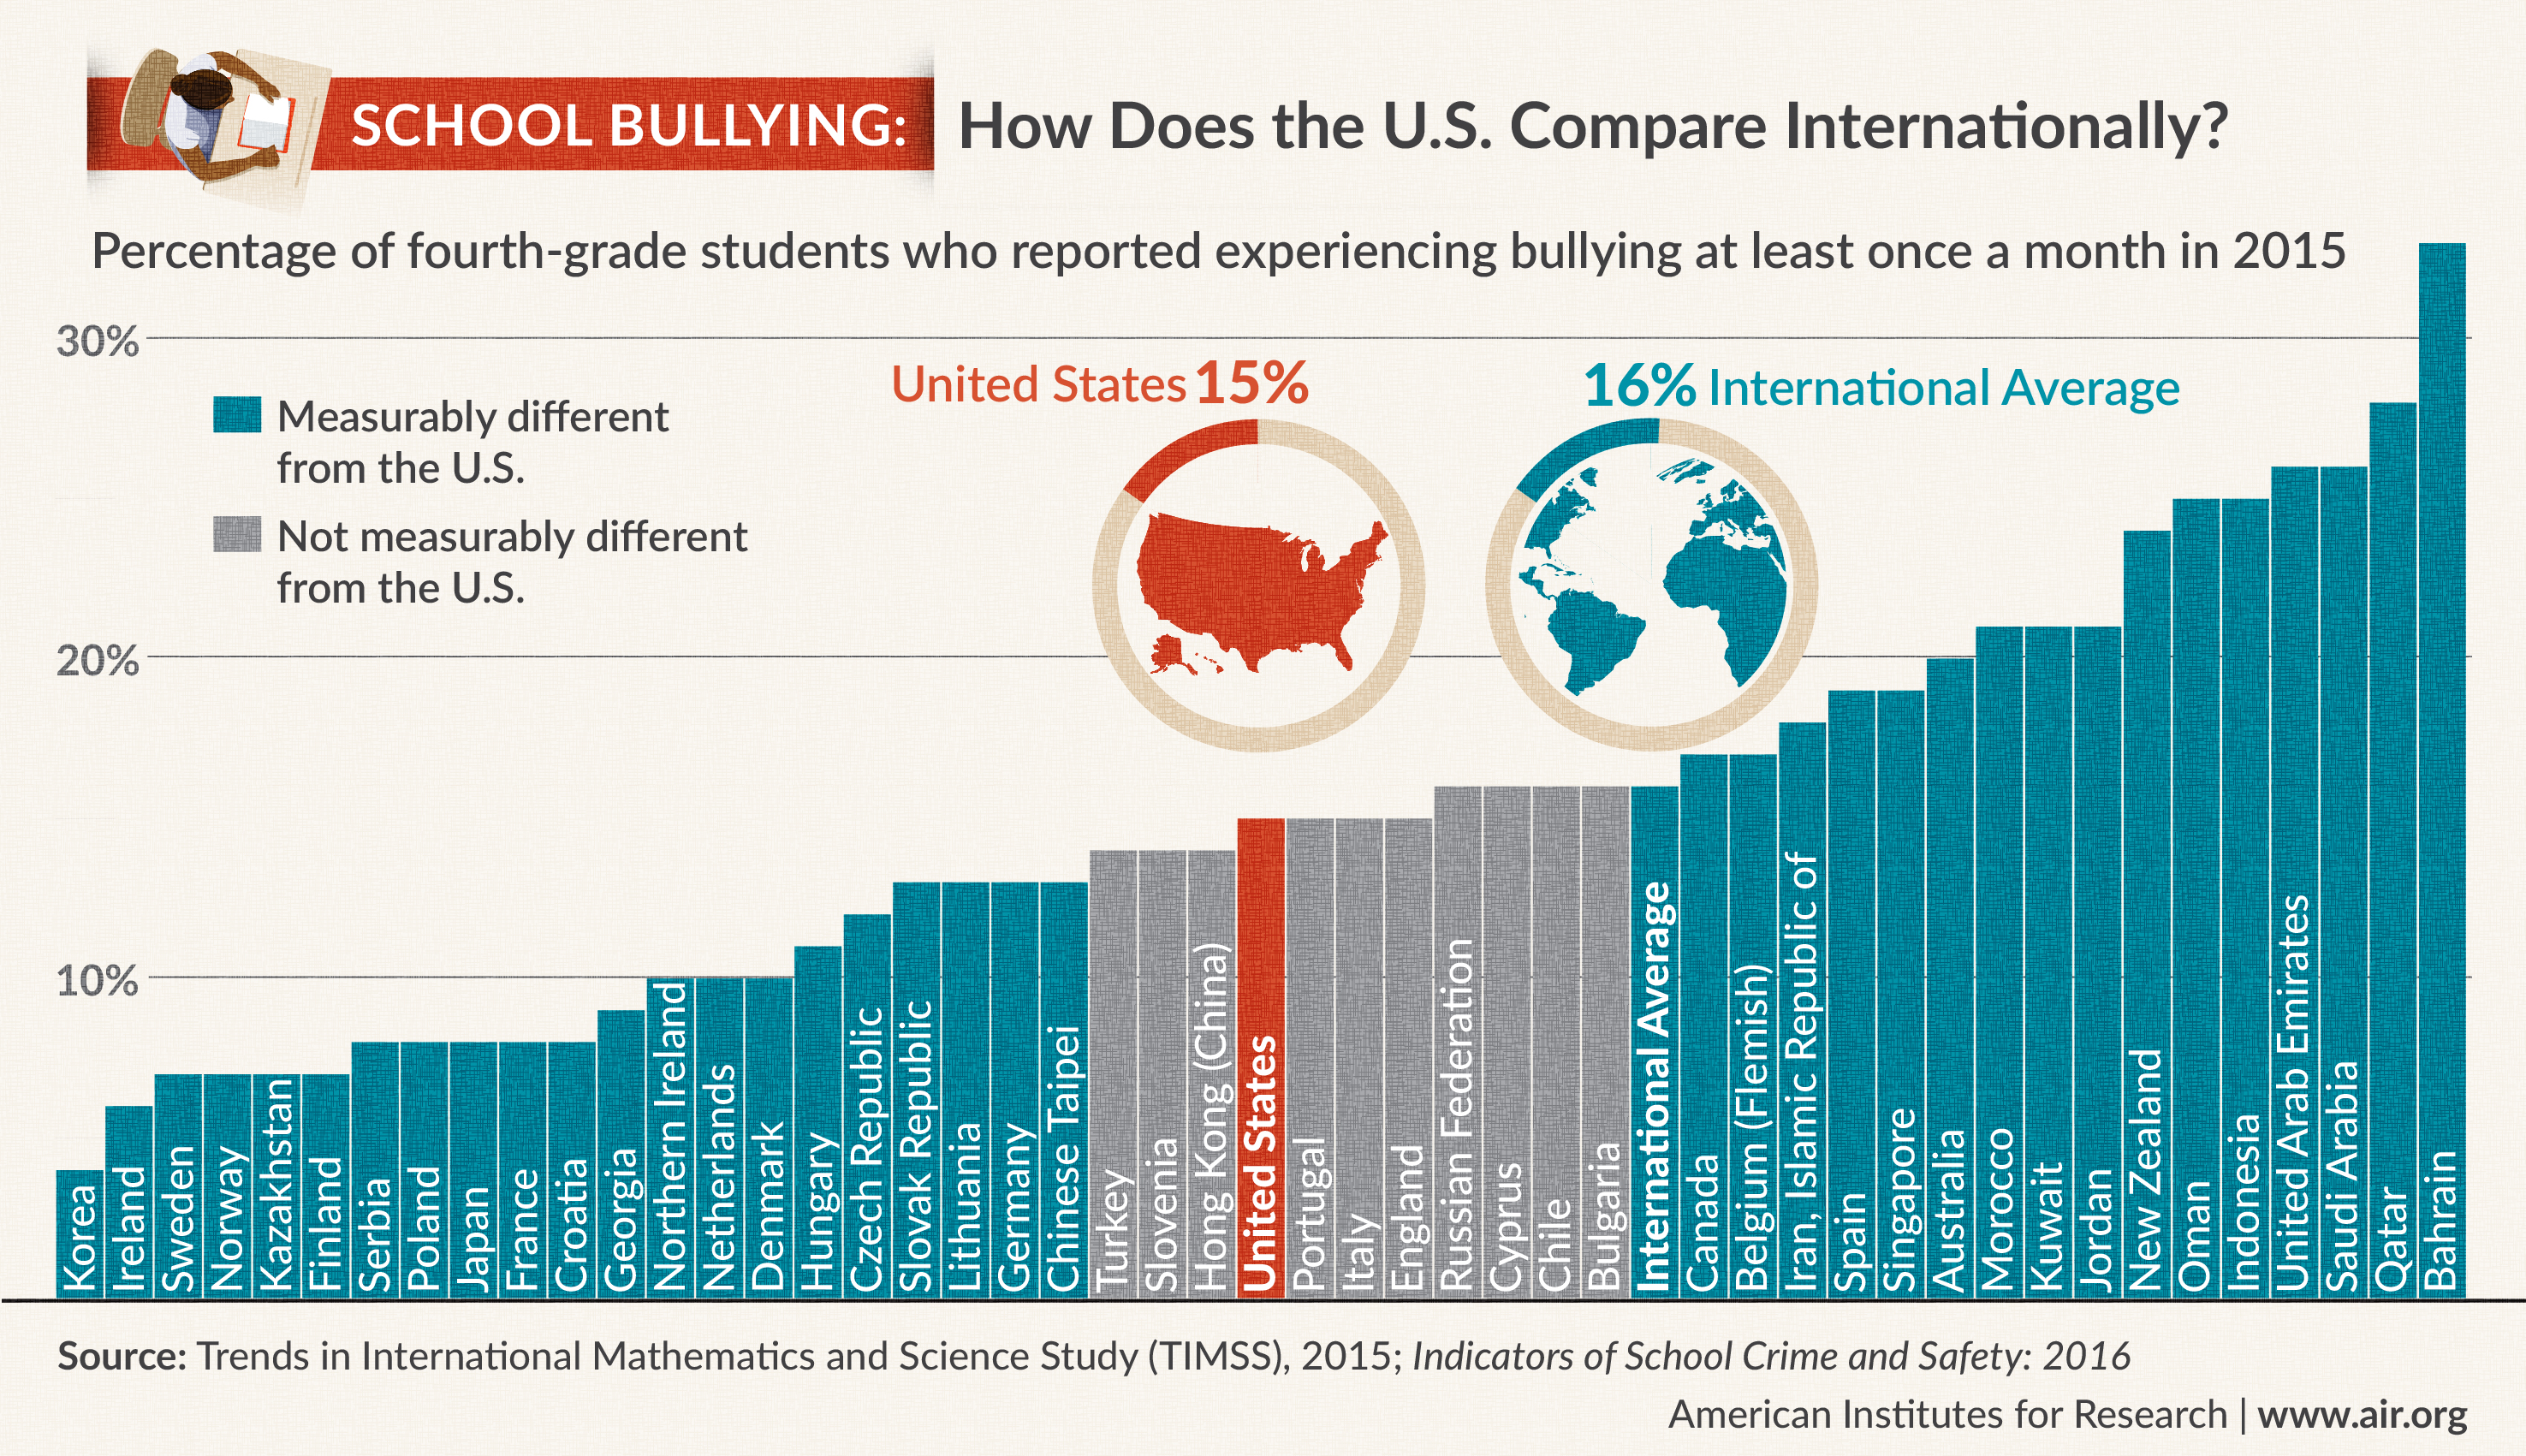 In 2015, about 15 percent of U.S. fourth-graders and 7 percent of U.S. eighth-graders reported experiencing bullying at least once a month. These percentages were lower than the international averages of 16 and 8 percent